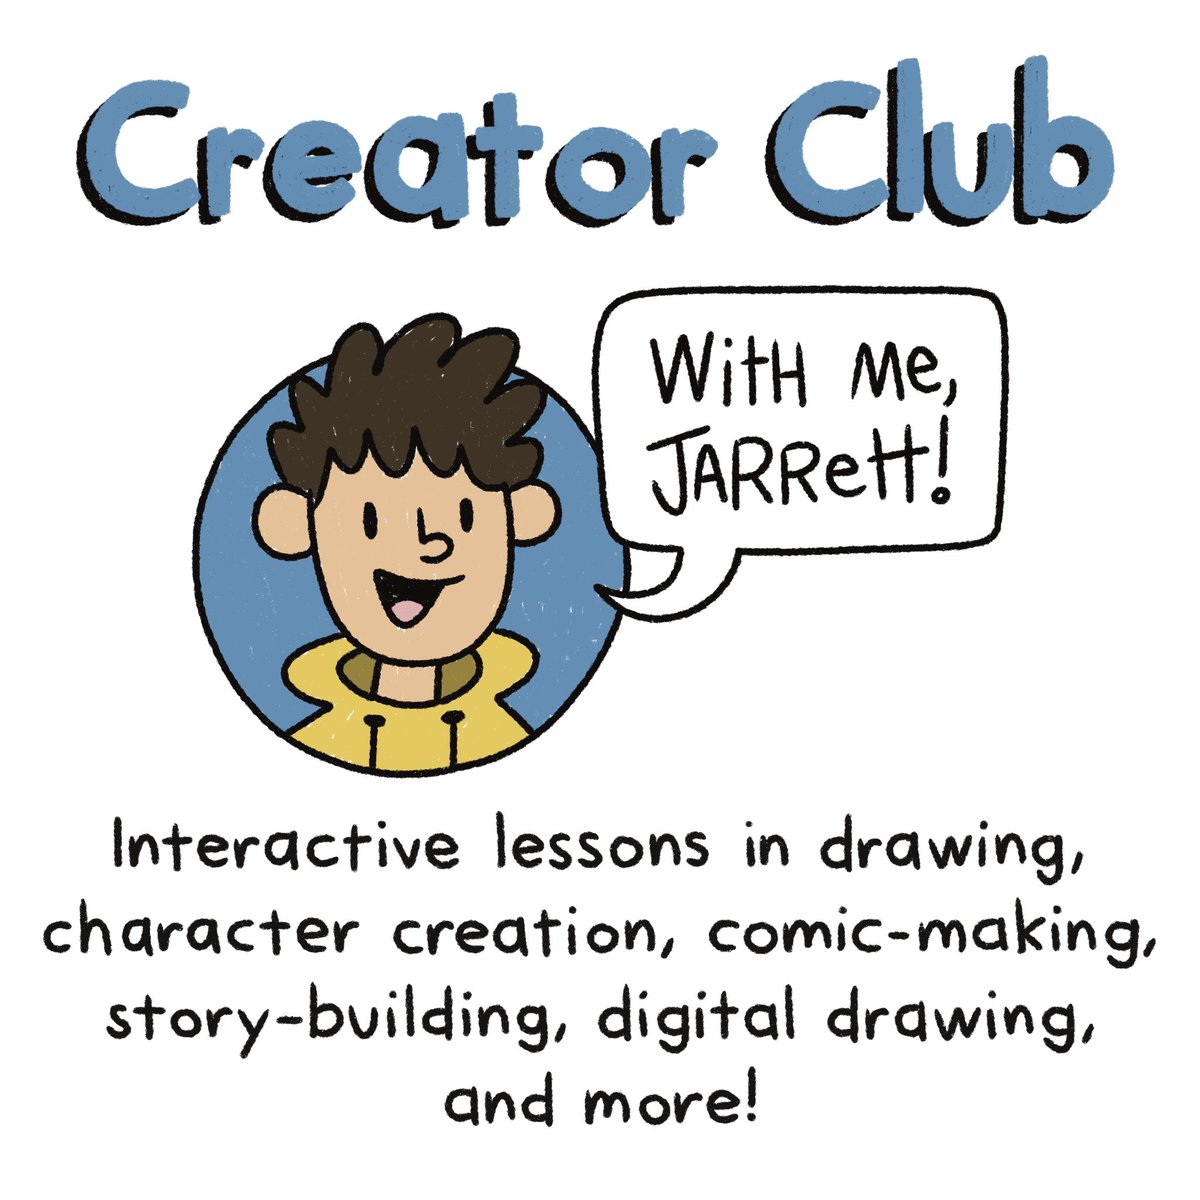 Do you know a kid who loves to draw? Make comics? Write stories? In my Creator Club, I teach kids everything I know about all that and more! This summer, I’ll also be offering attendees feedback on a portfolio or project of theirs. More info/signups here: jarrettlerner.com/creator-club/